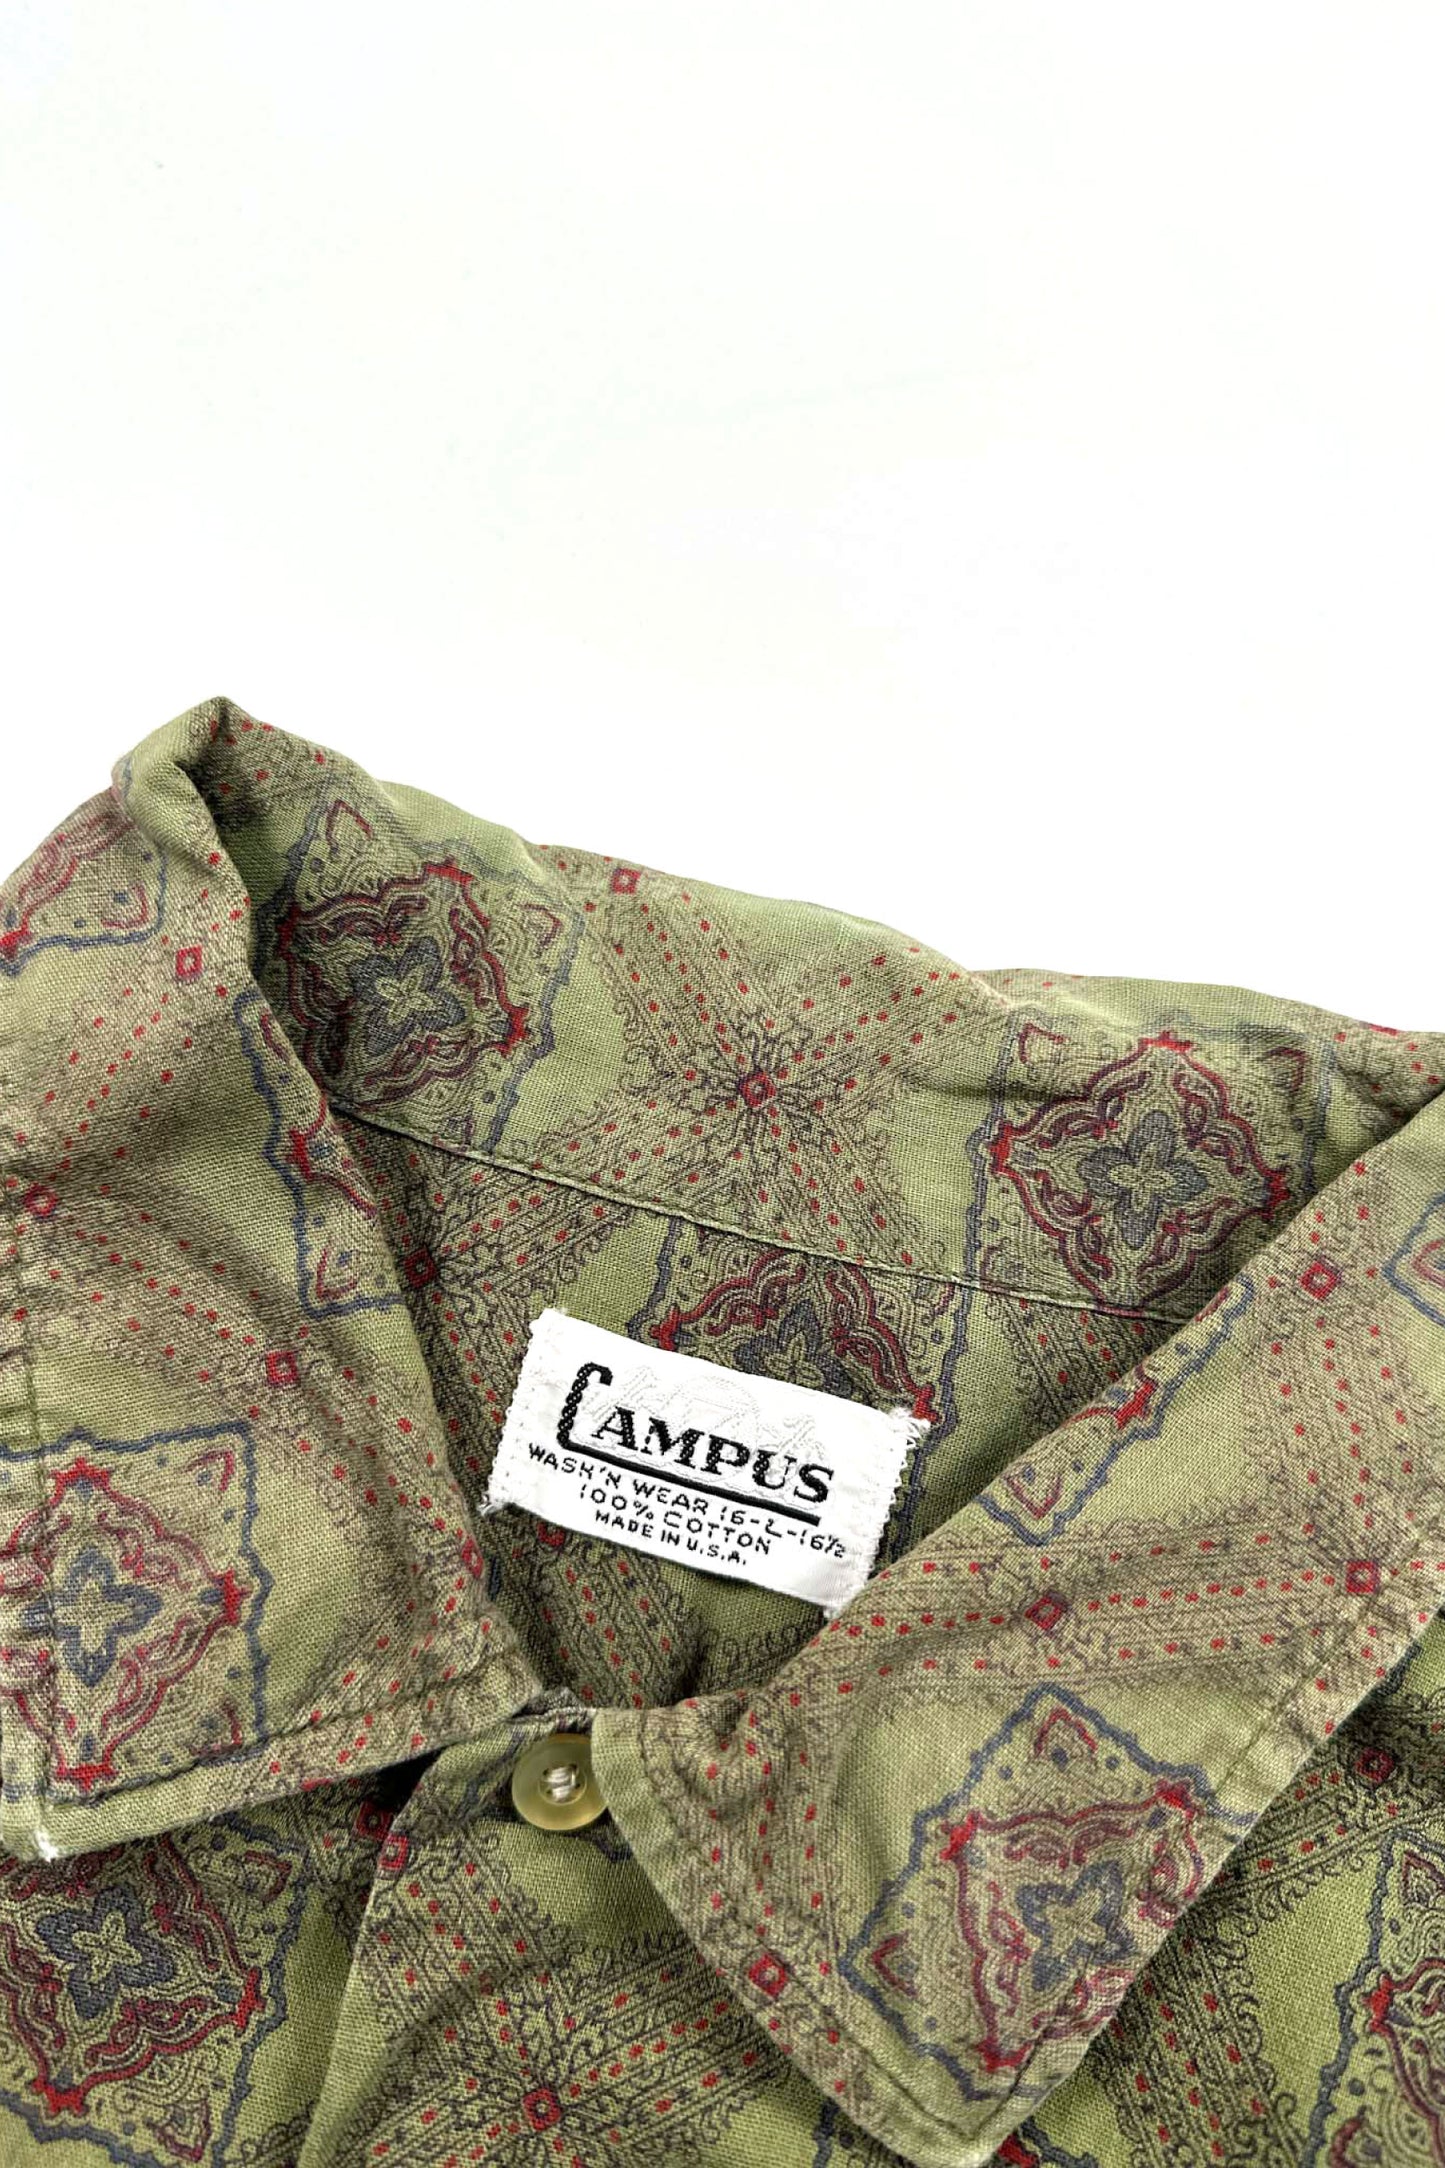 60's Made in USA CAMPUS pattern shirt